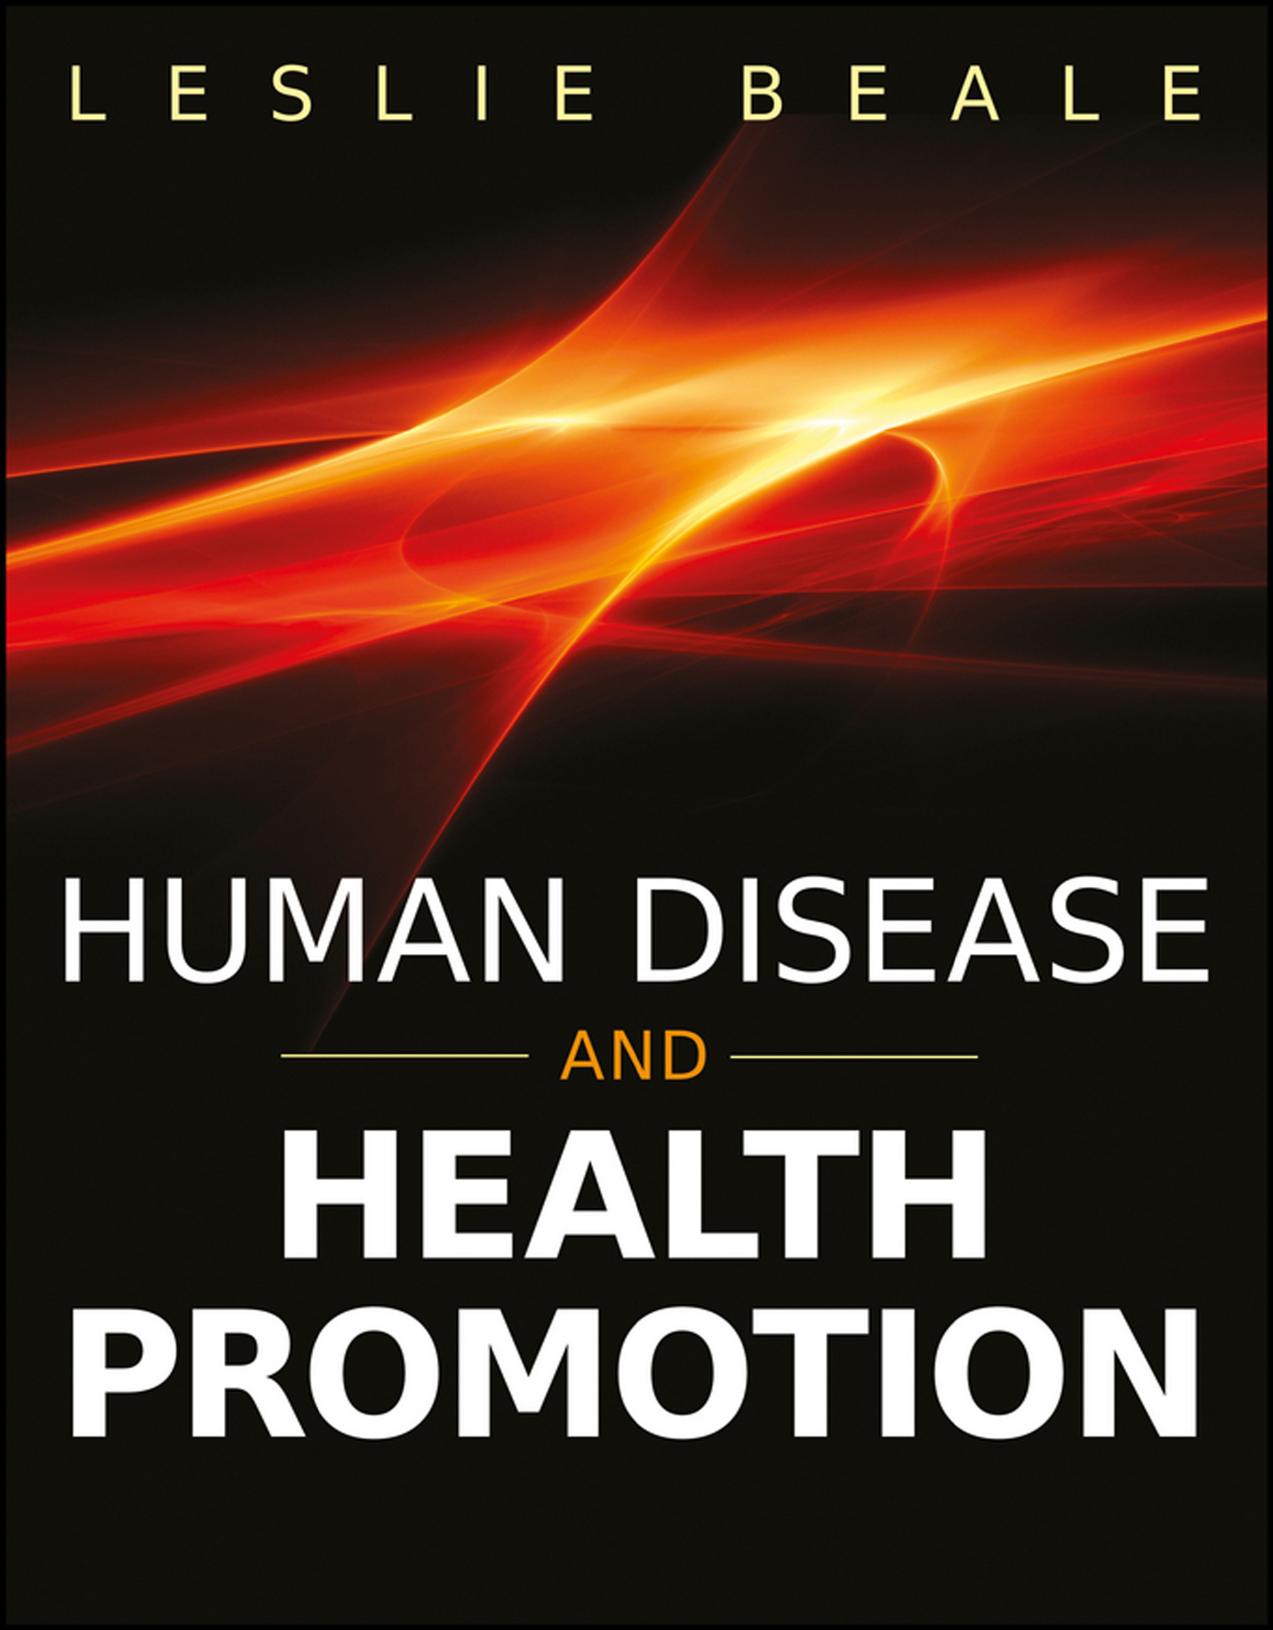 Human Disease and Health Promotion